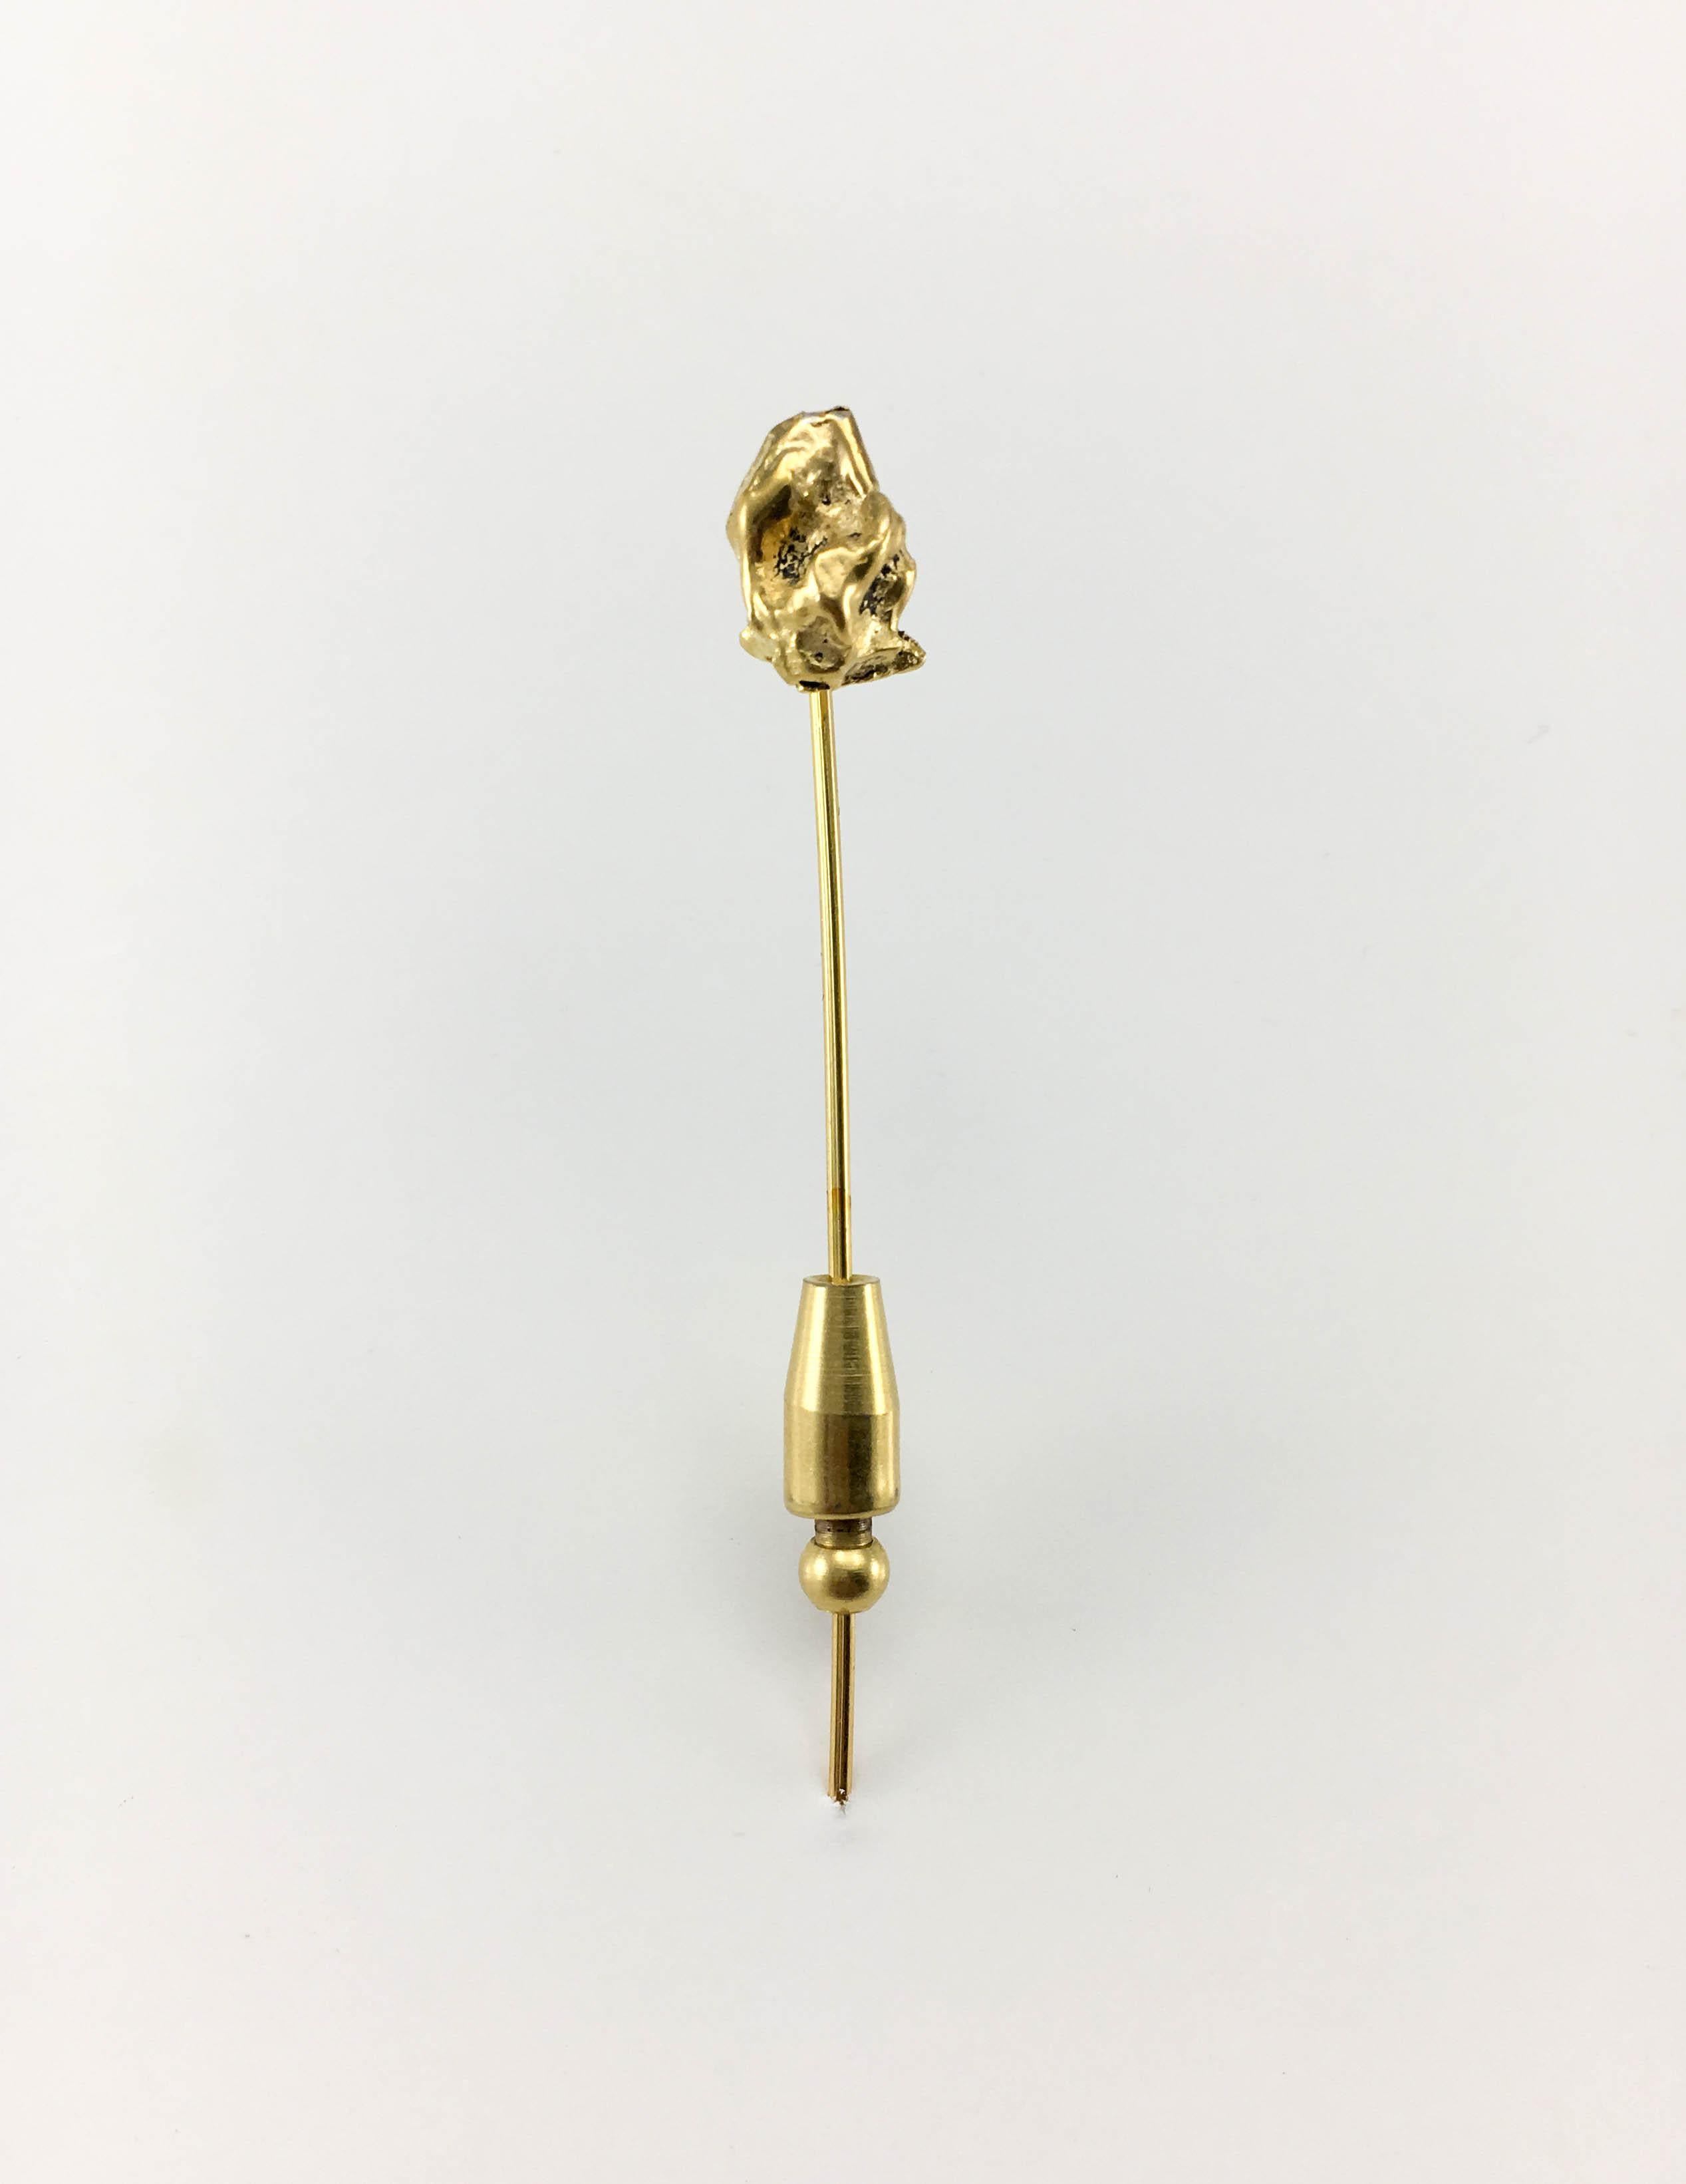 Vintage Chanel Gold-Plated Pin. This stylish pin by Chanel dates back from the 1970’s. Gold-plated, it was designed to resemble a gold nugget. Versatile, it can be worn on a hat, coat, scarf or even a tie. Chanel signed and number on the back – it